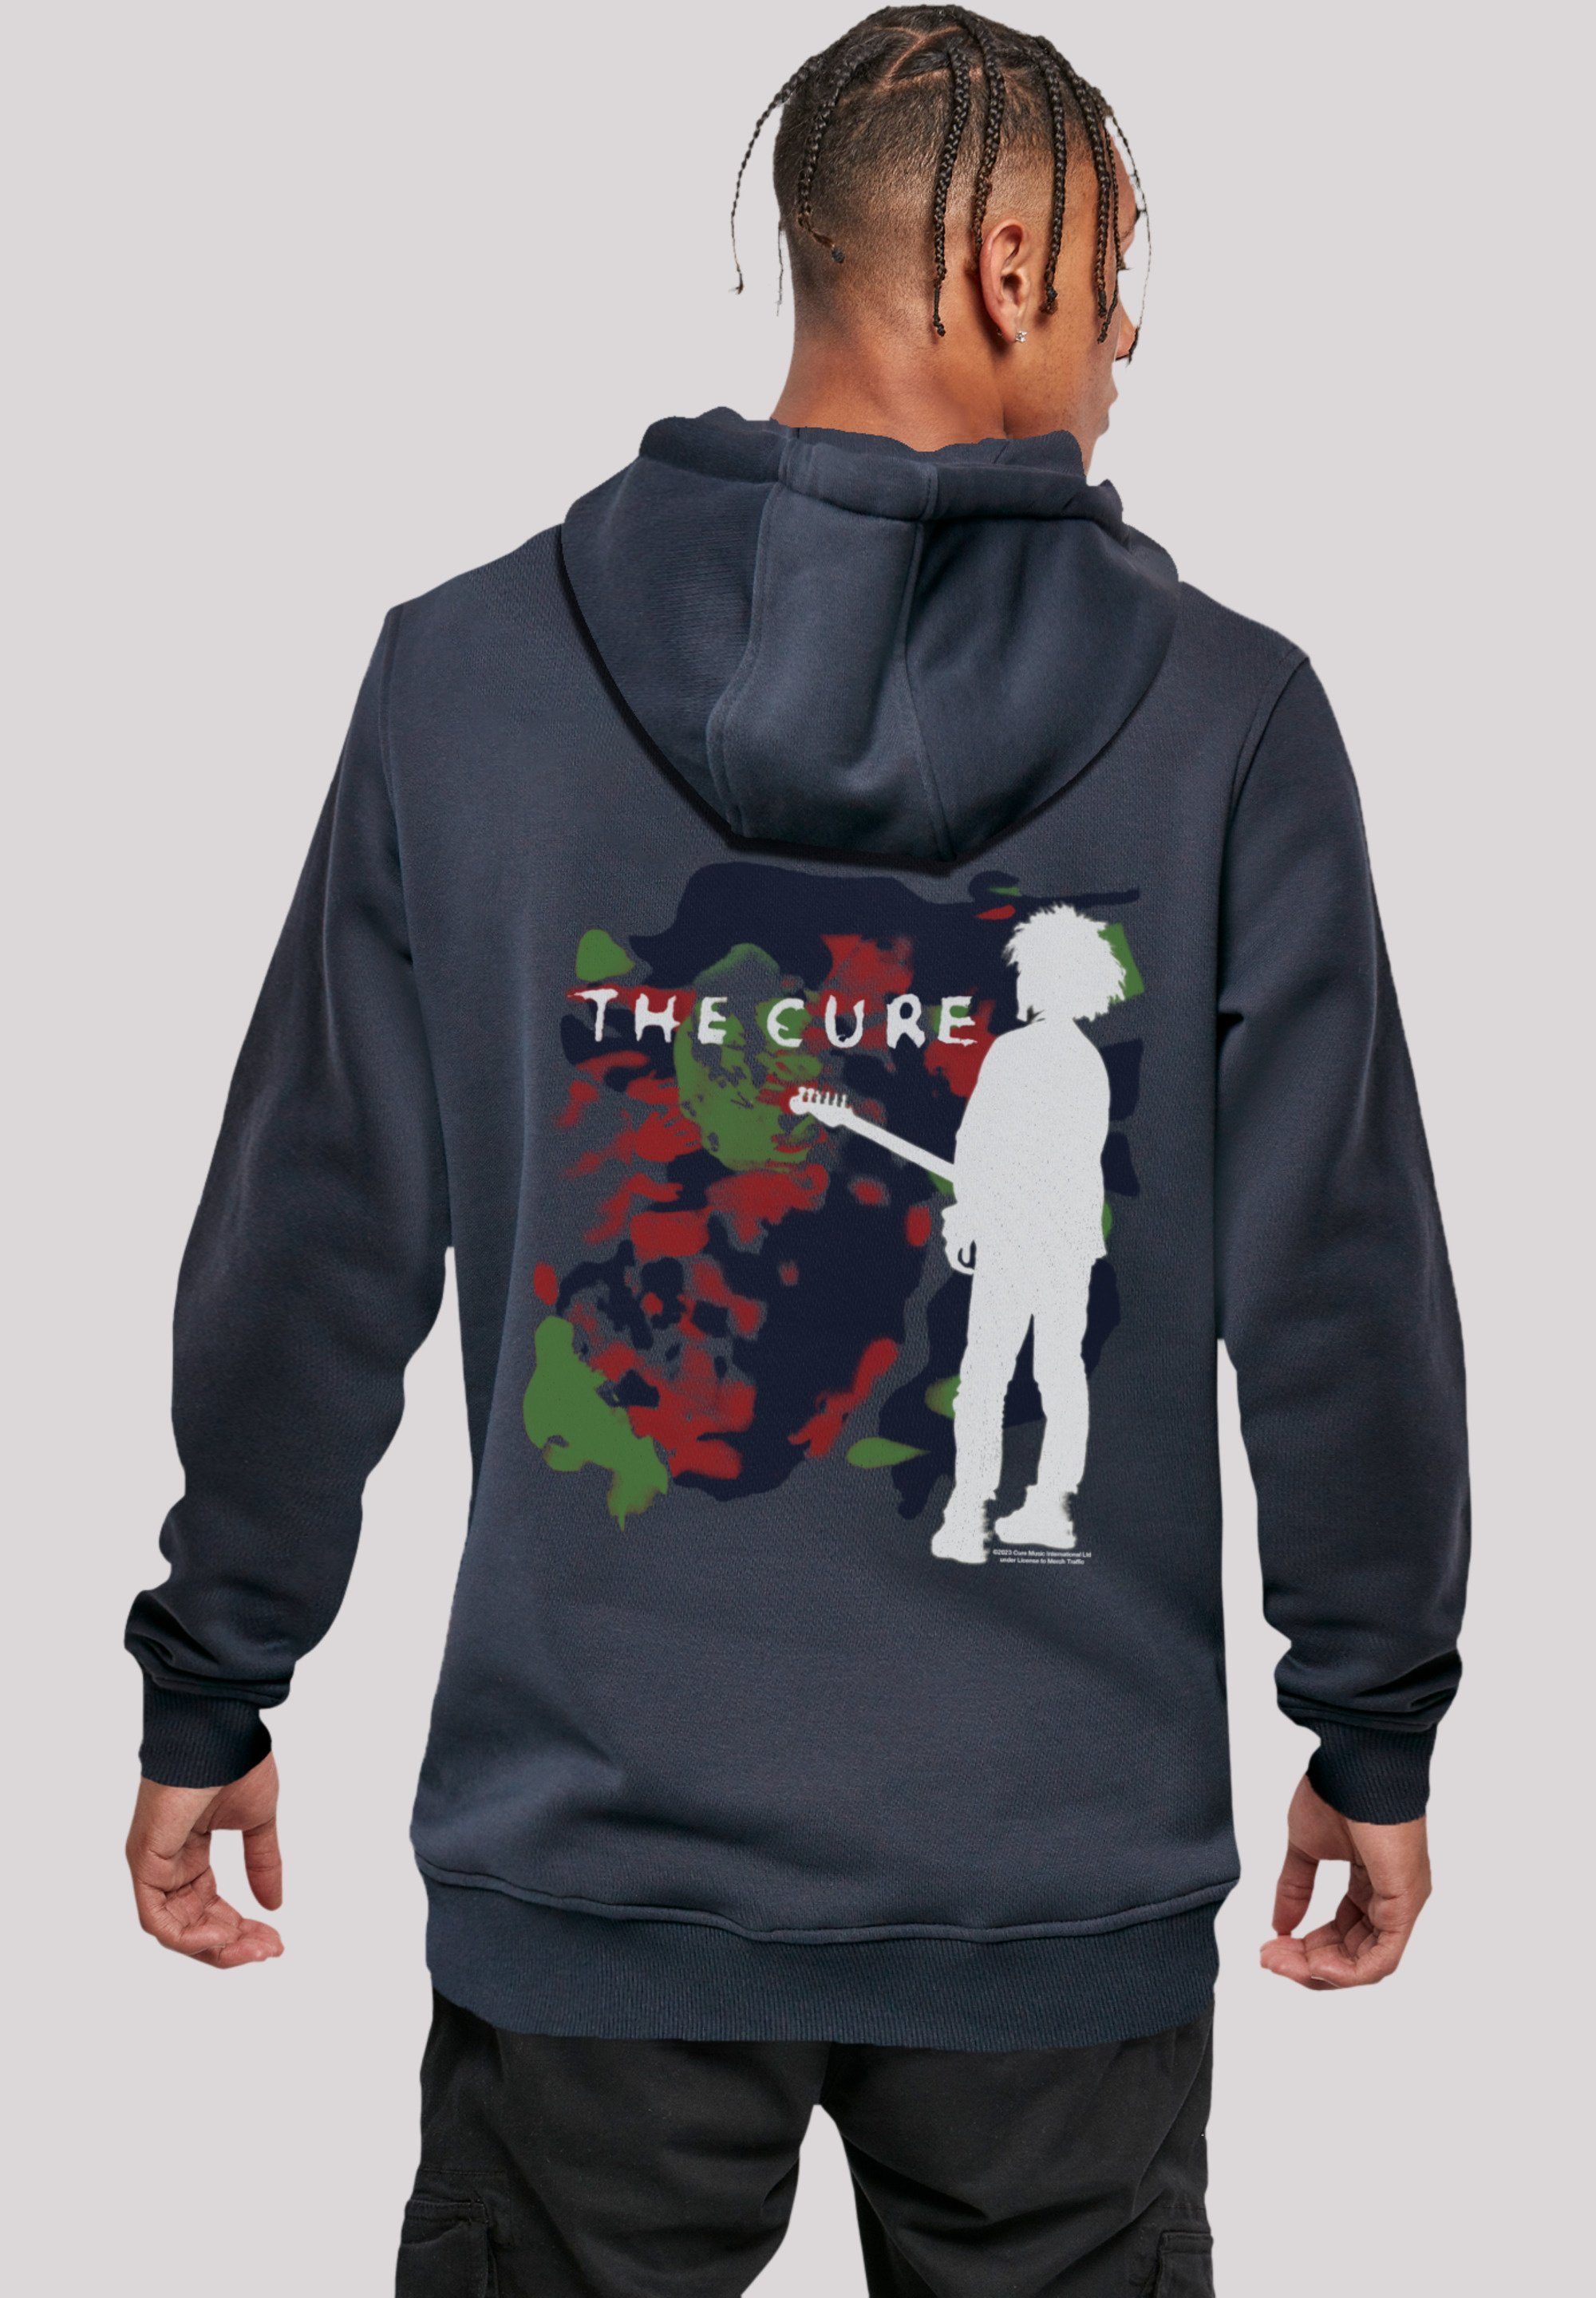 Don't Qualität, Cure The Hoodie Rock Cry F4NT4STIC Boys Premium Band, navy Logo Music Band